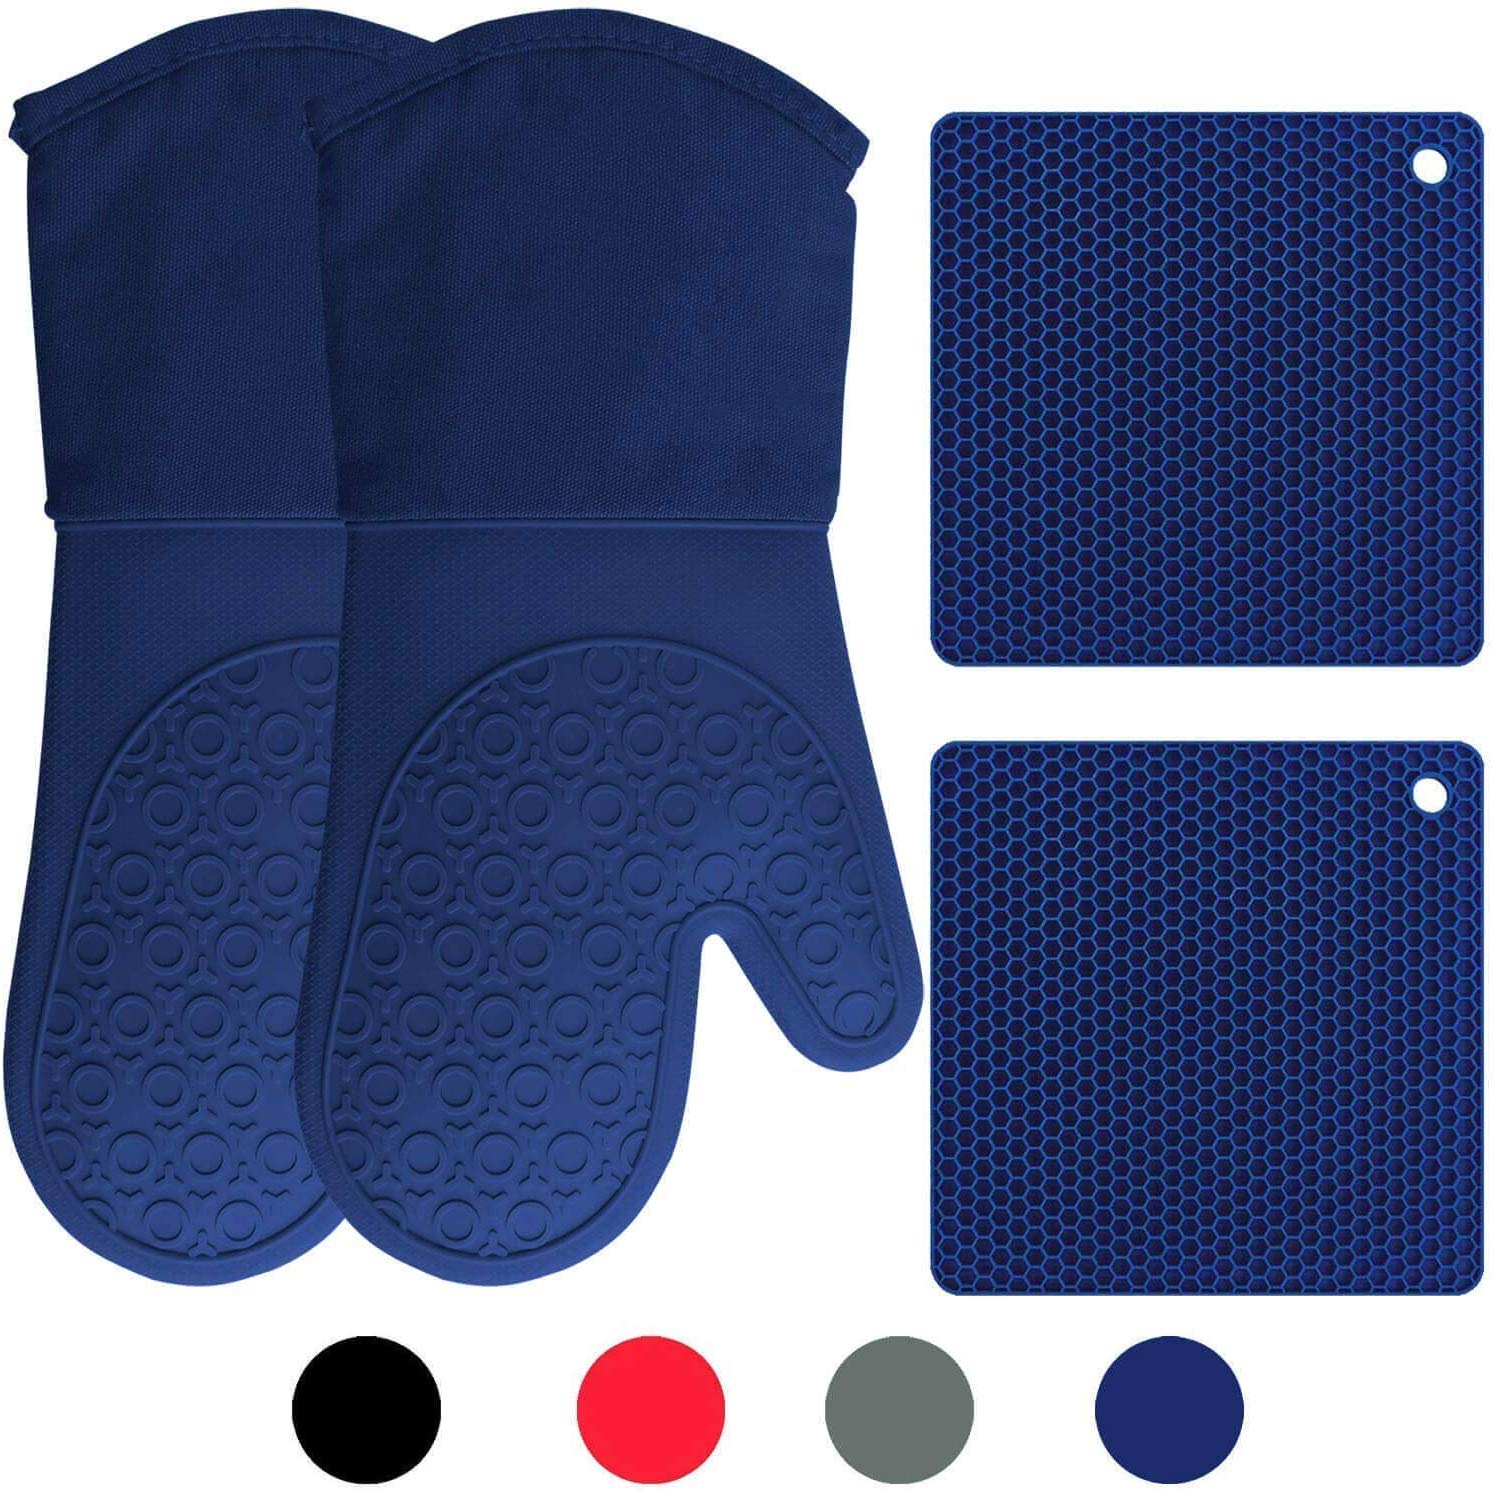 Silicone Oven Mitts and Potholders (4-Piece Set) Heavy Duty Cooking Gloves, Kitchen Counter Safe Trivet Mats | Advanced Heat Resistance, Non-Slip Textured Grip (Royal Blue)